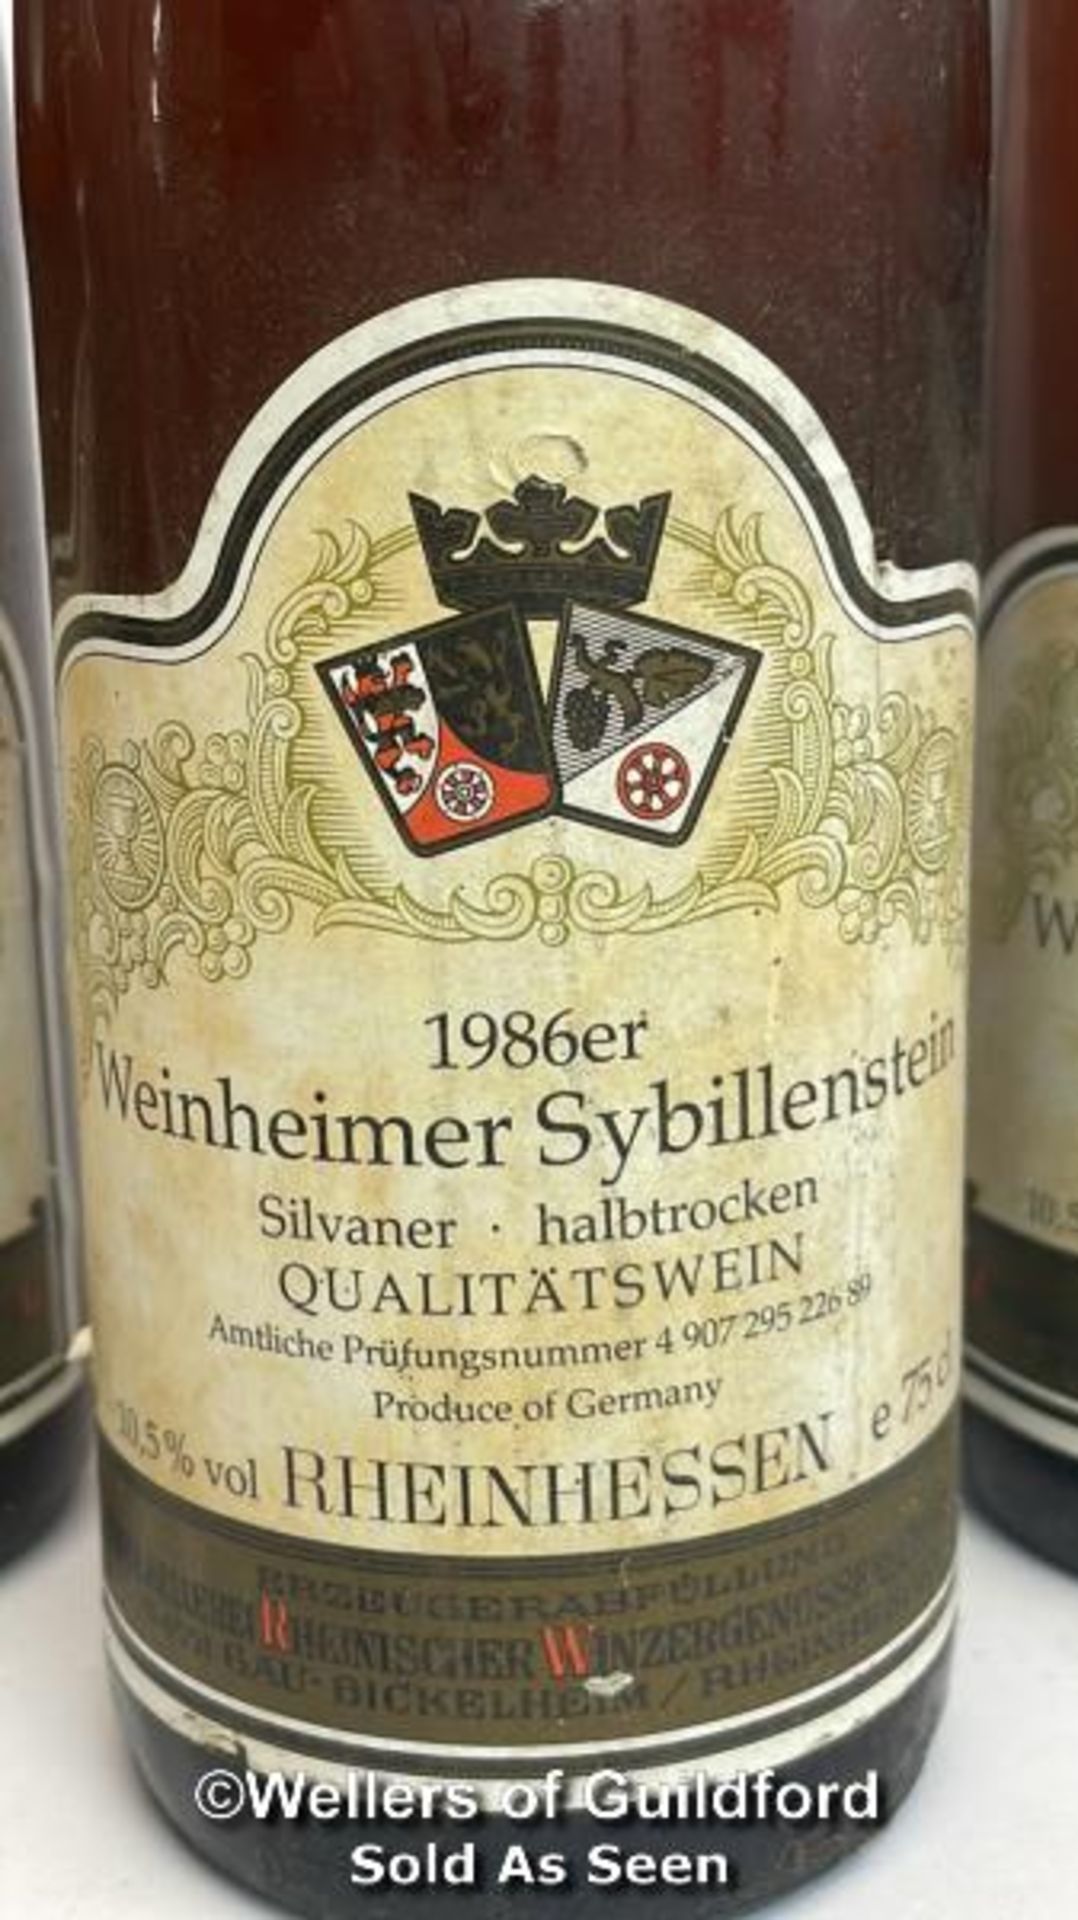 Three bottles of 1986 Weinheimer Sybillenstein, 75cl, 10.5% vol / Please see images for fill level - Image 2 of 4